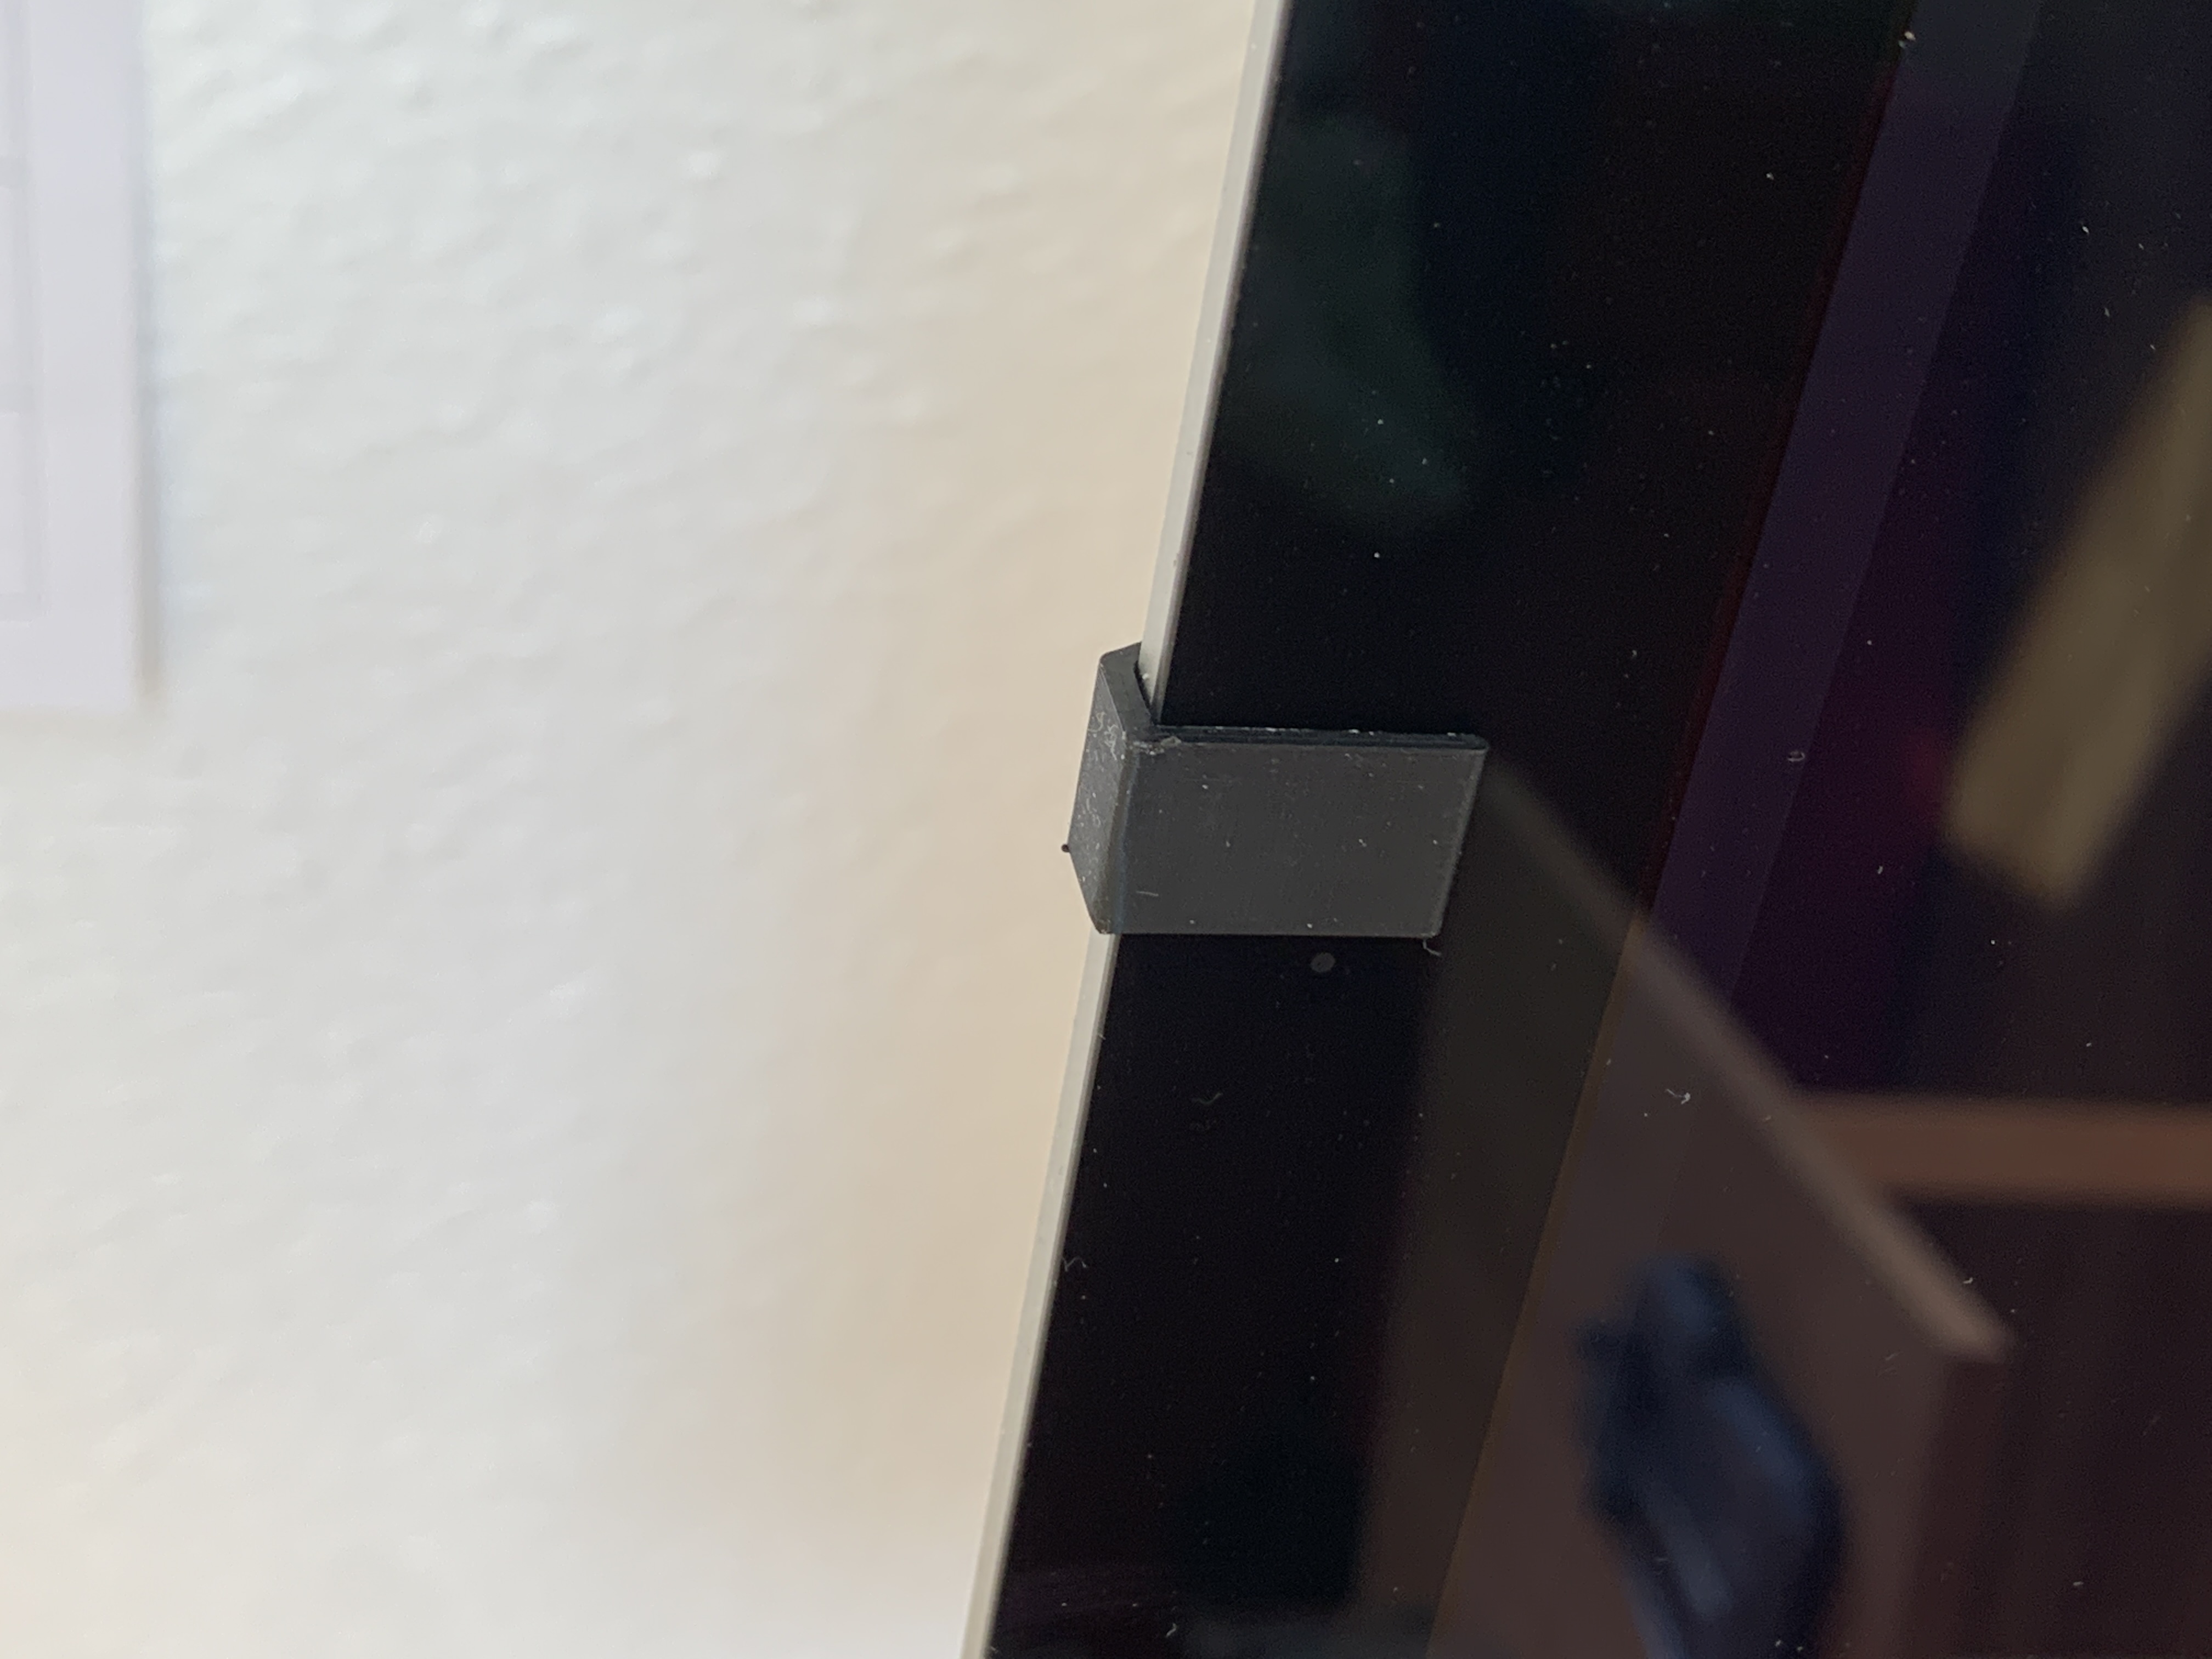 iMac 27" 5k camera cover, simple and clean